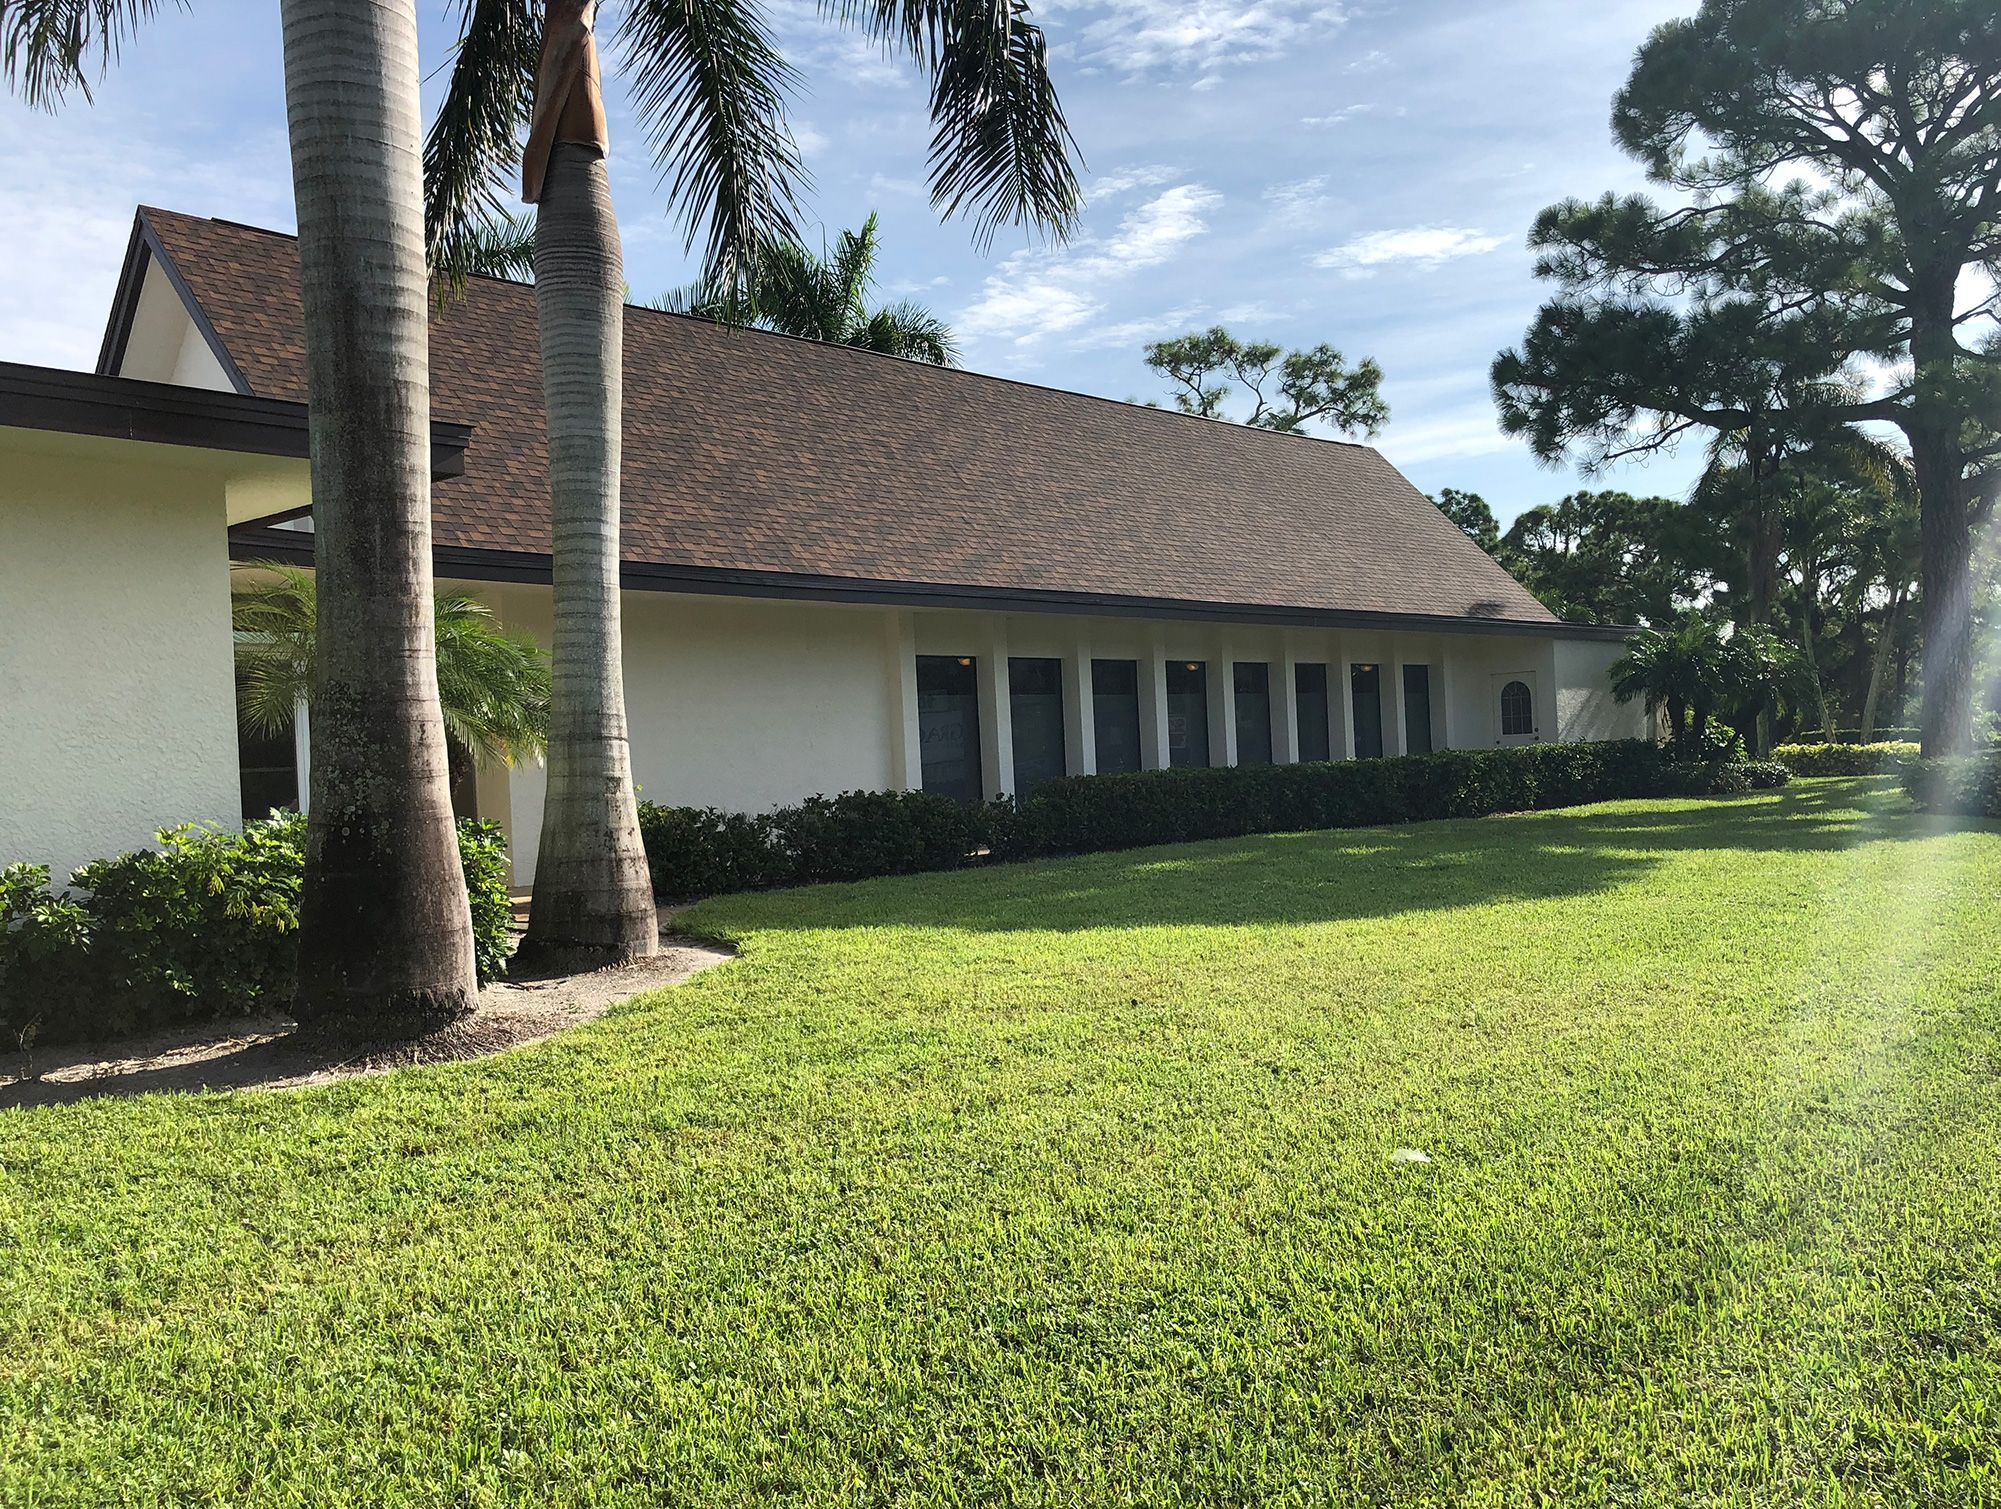 Church painters in Southwest Florida